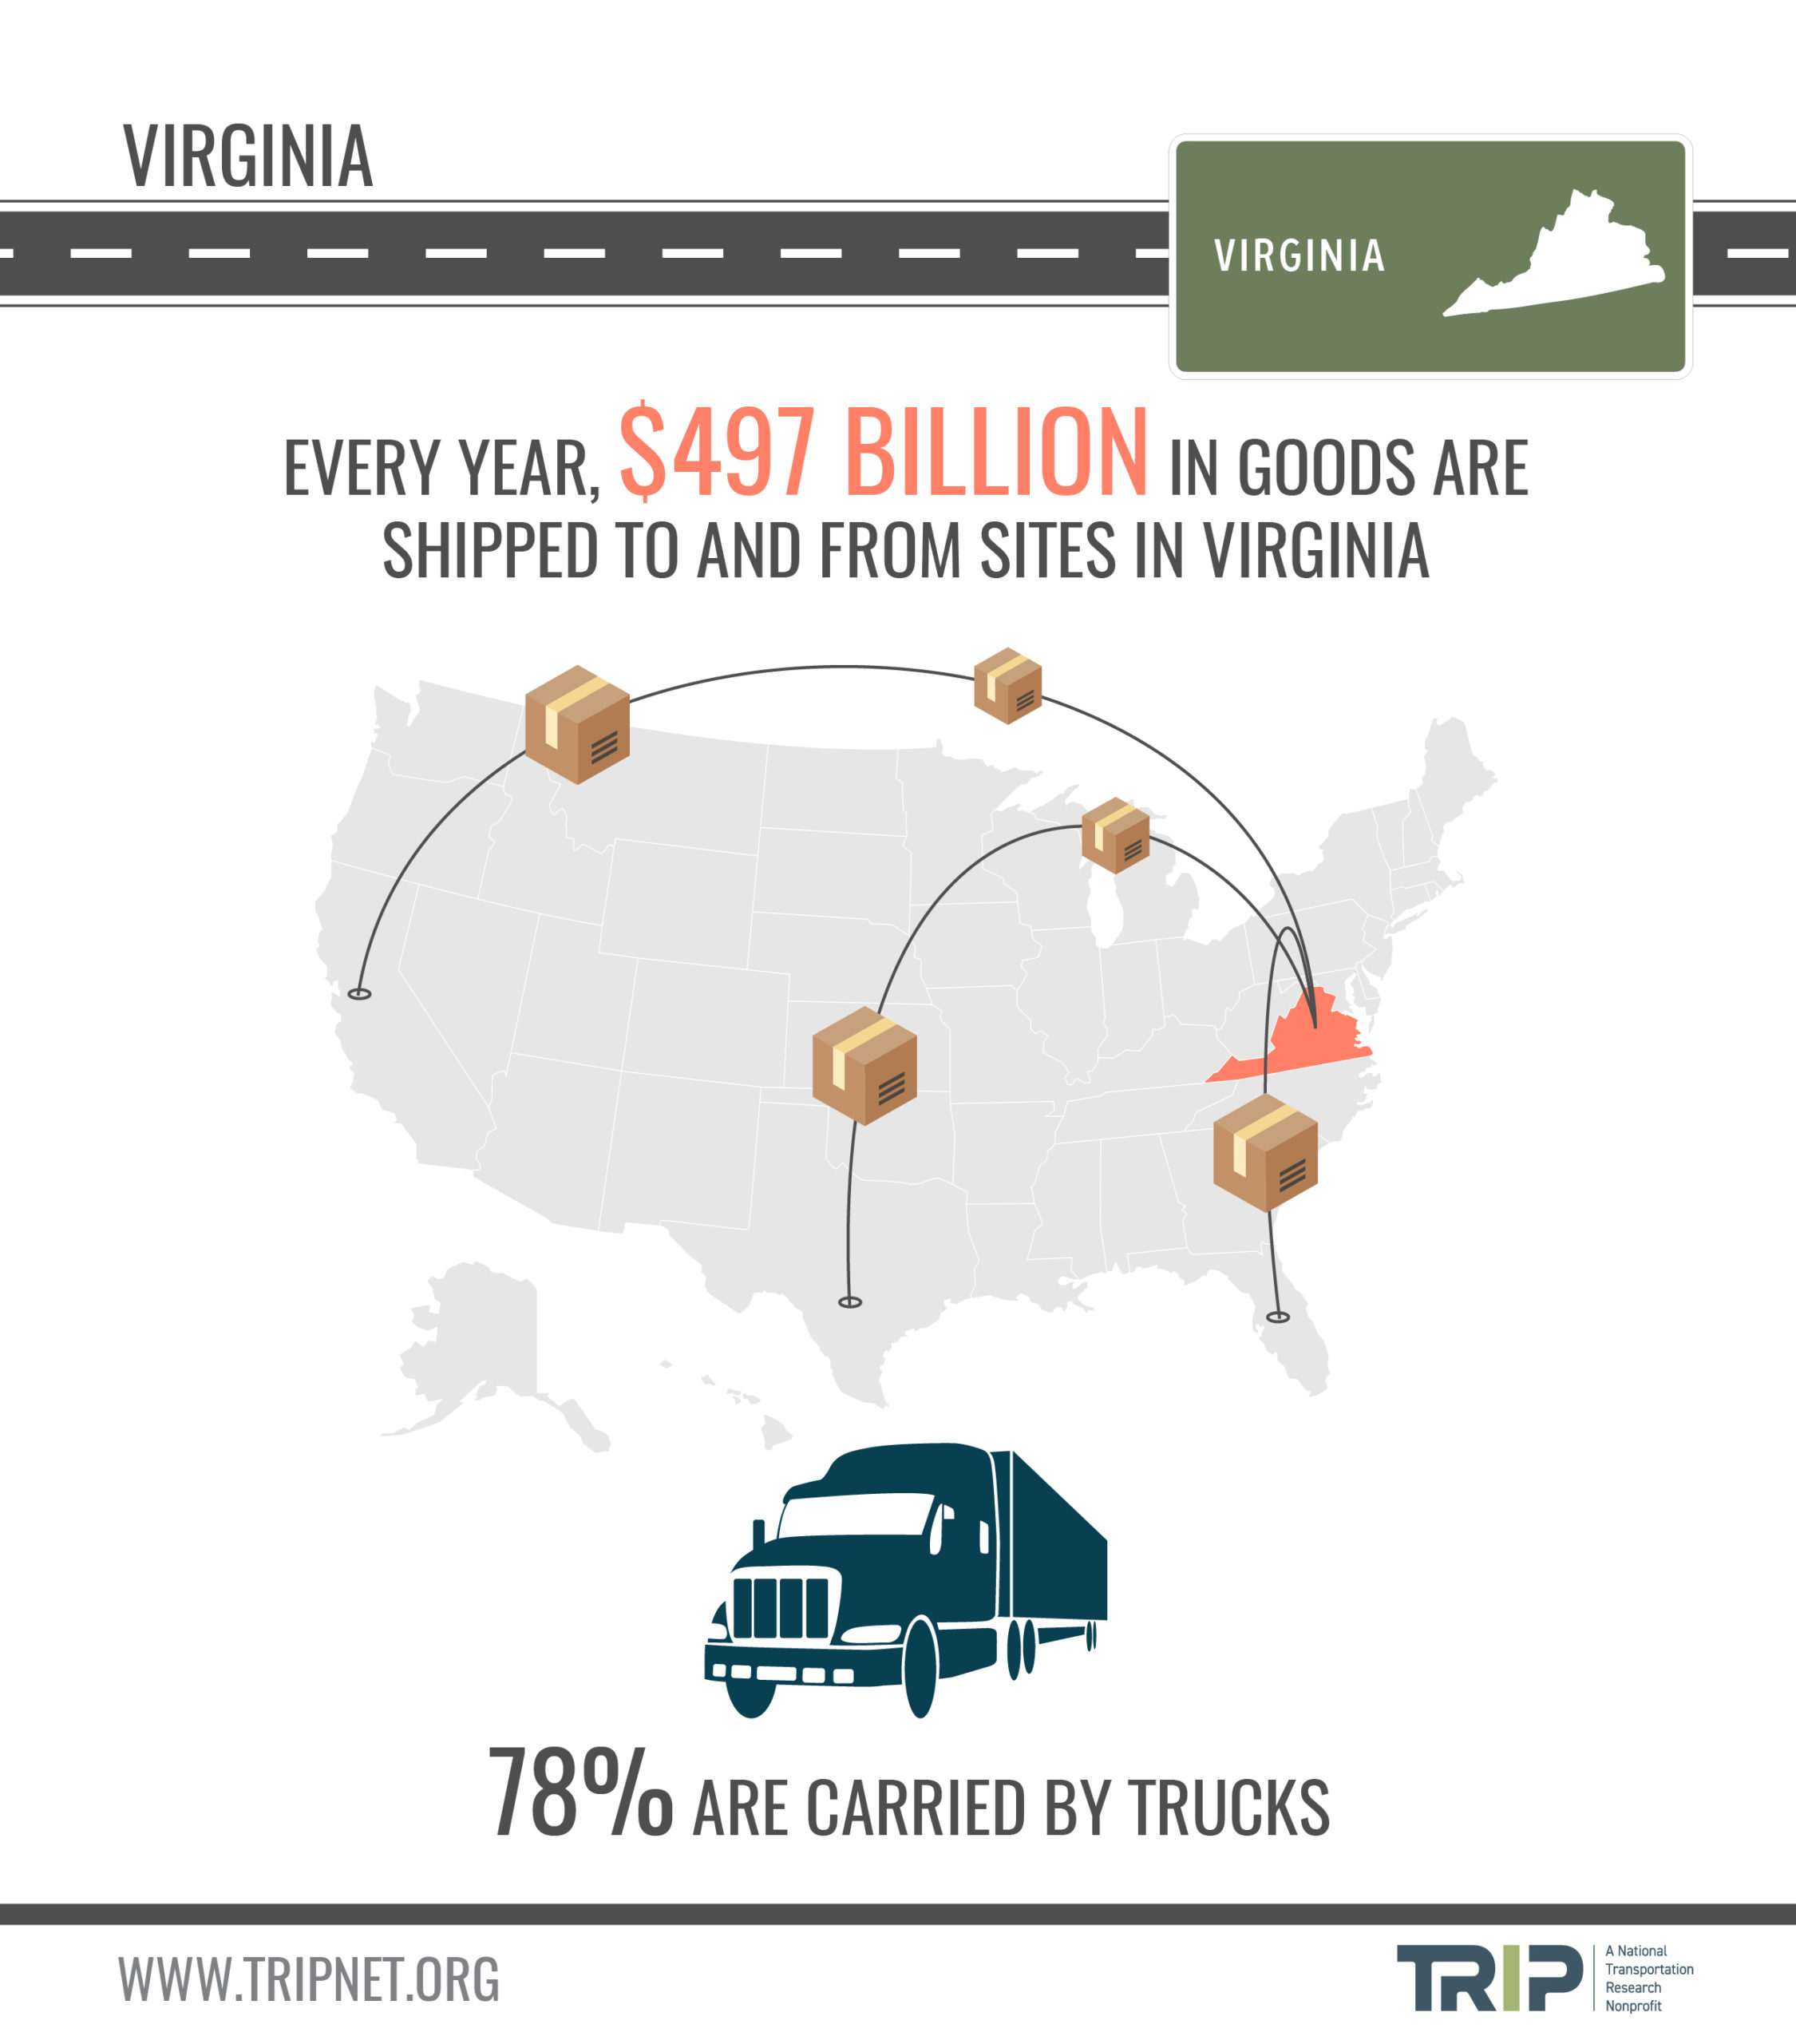 Virginia’s Goods Shipped Infographic – February 2020